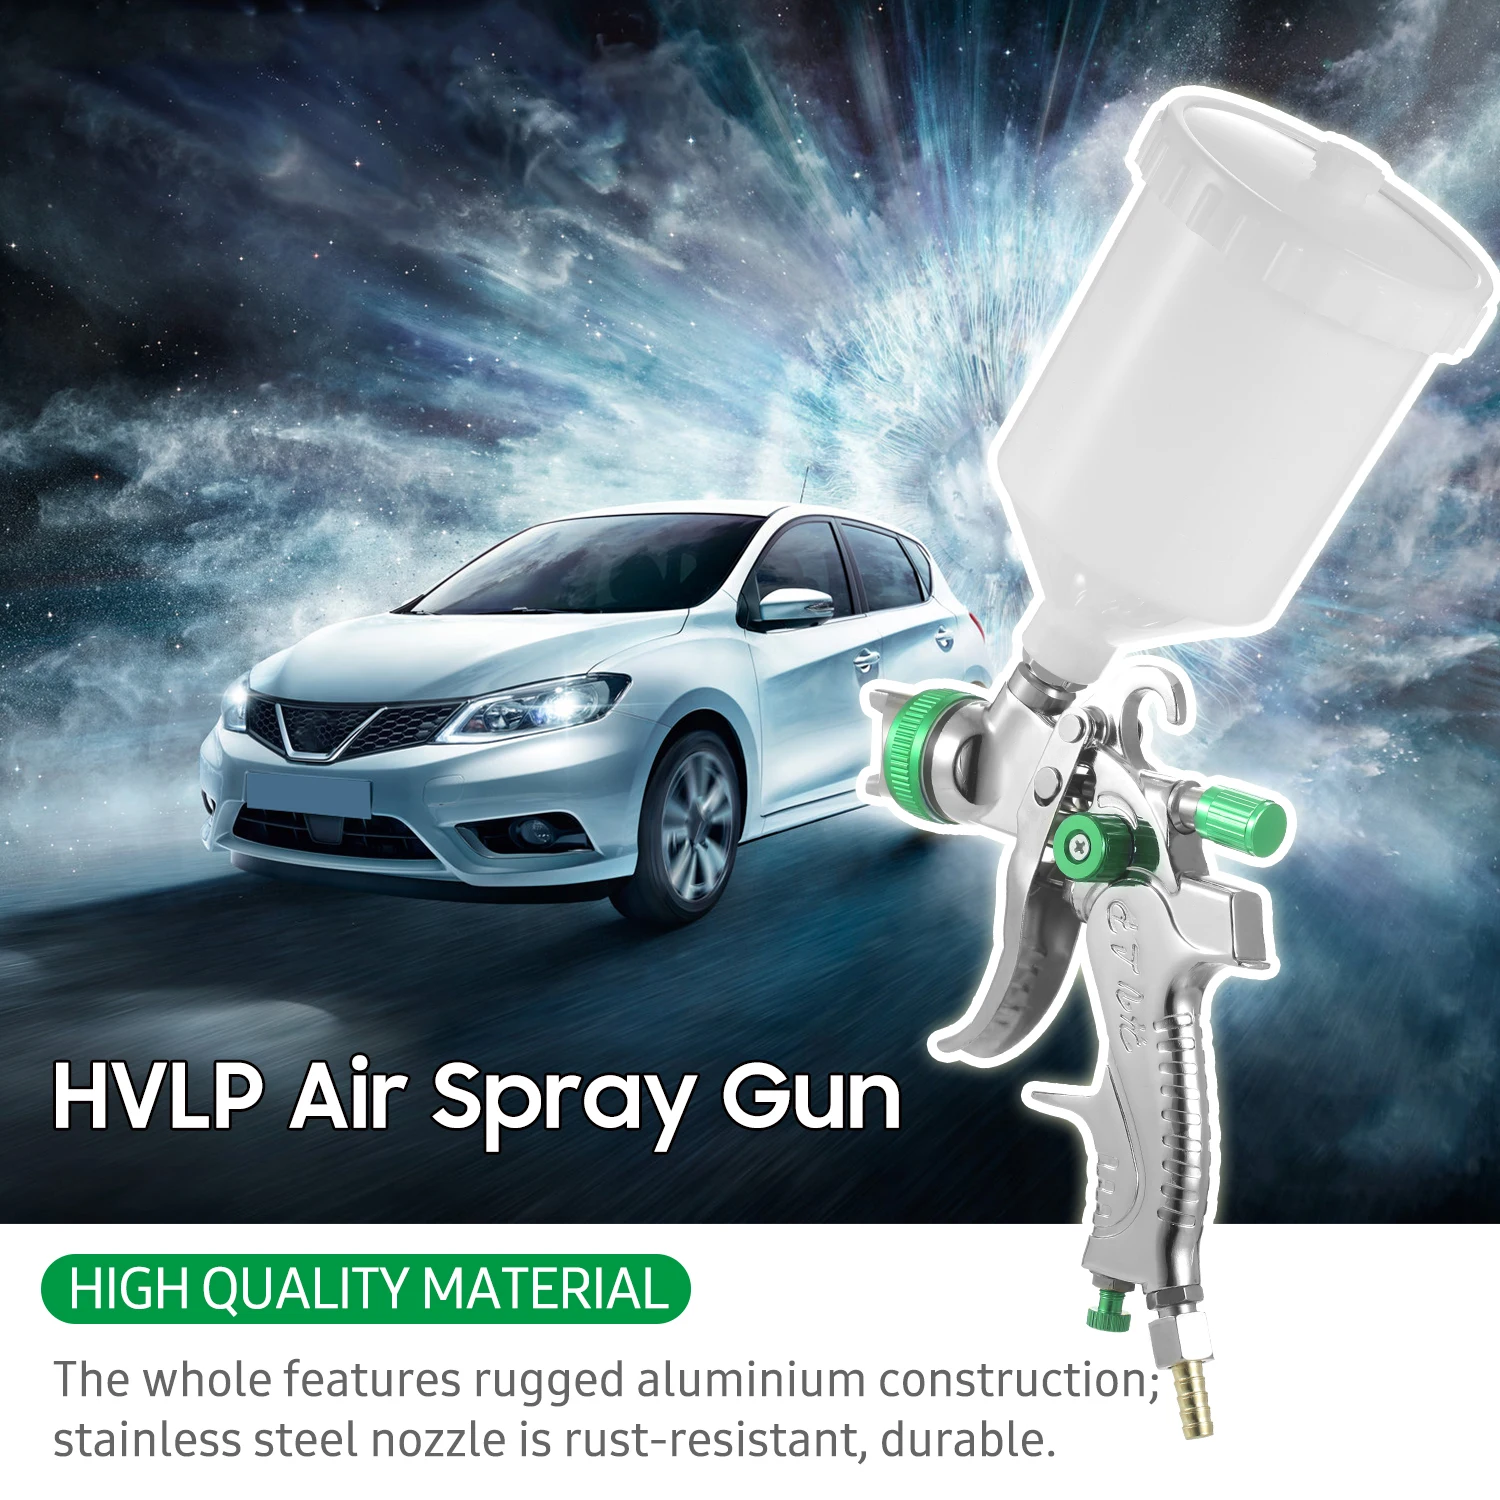 

Gravity Feed Air Spray Gun HVLP Sprayer Paint Gun with 600ML Cup 1.4mm 1.7mm 2.0mm Nozzle for Painting Car Furniture Wall